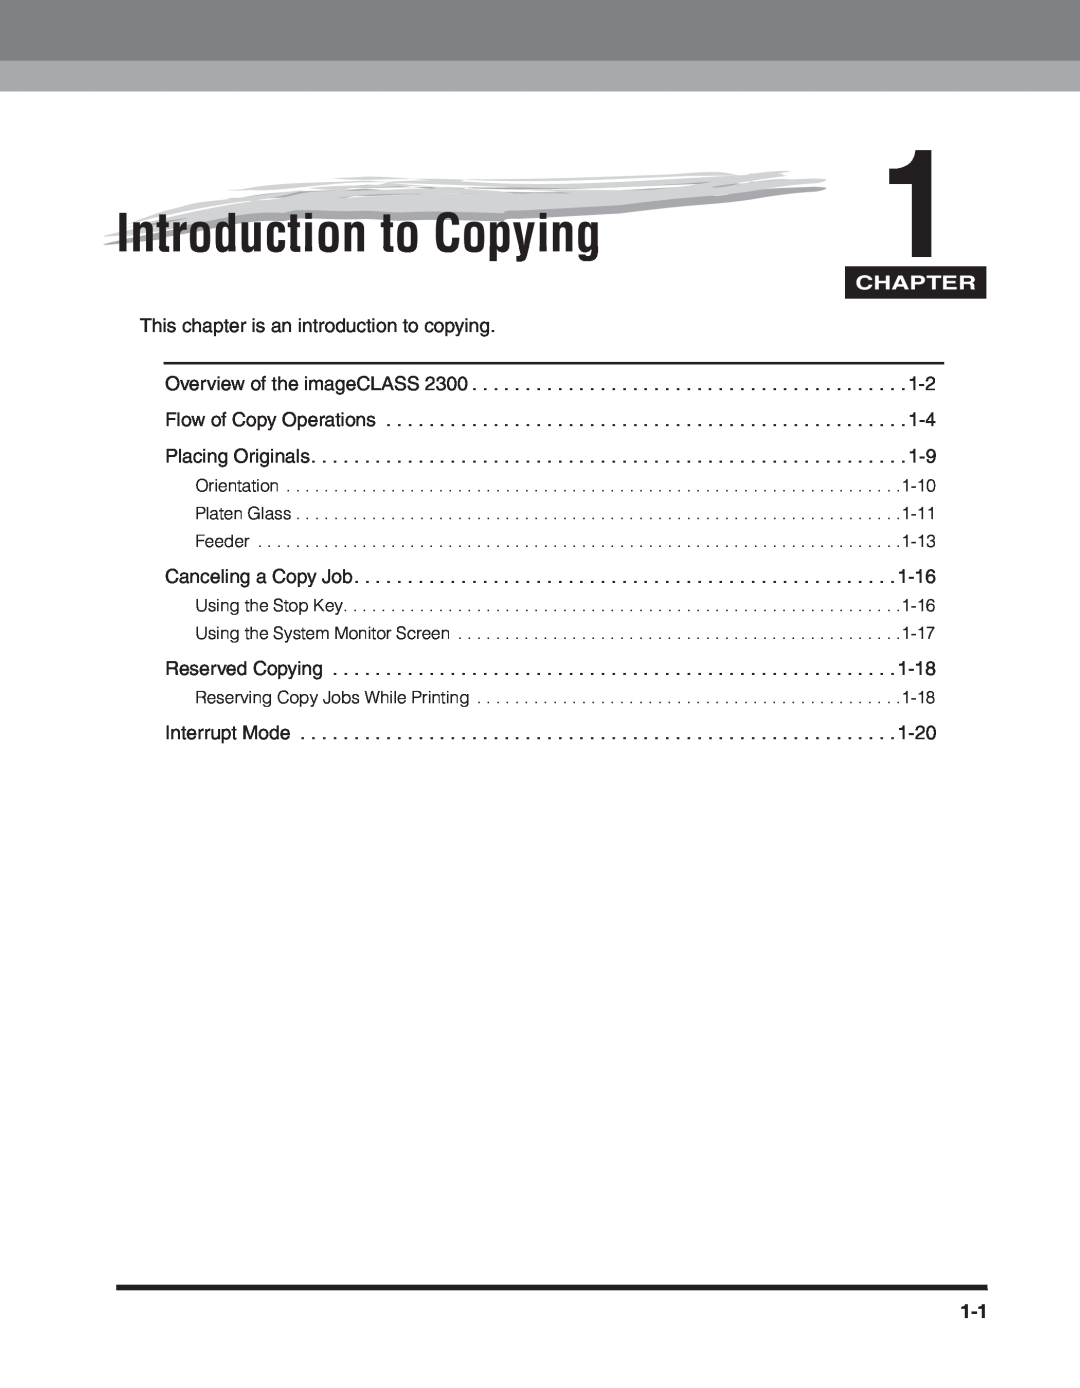 Canon 2300 manual Introduction to Copying, Chapter 